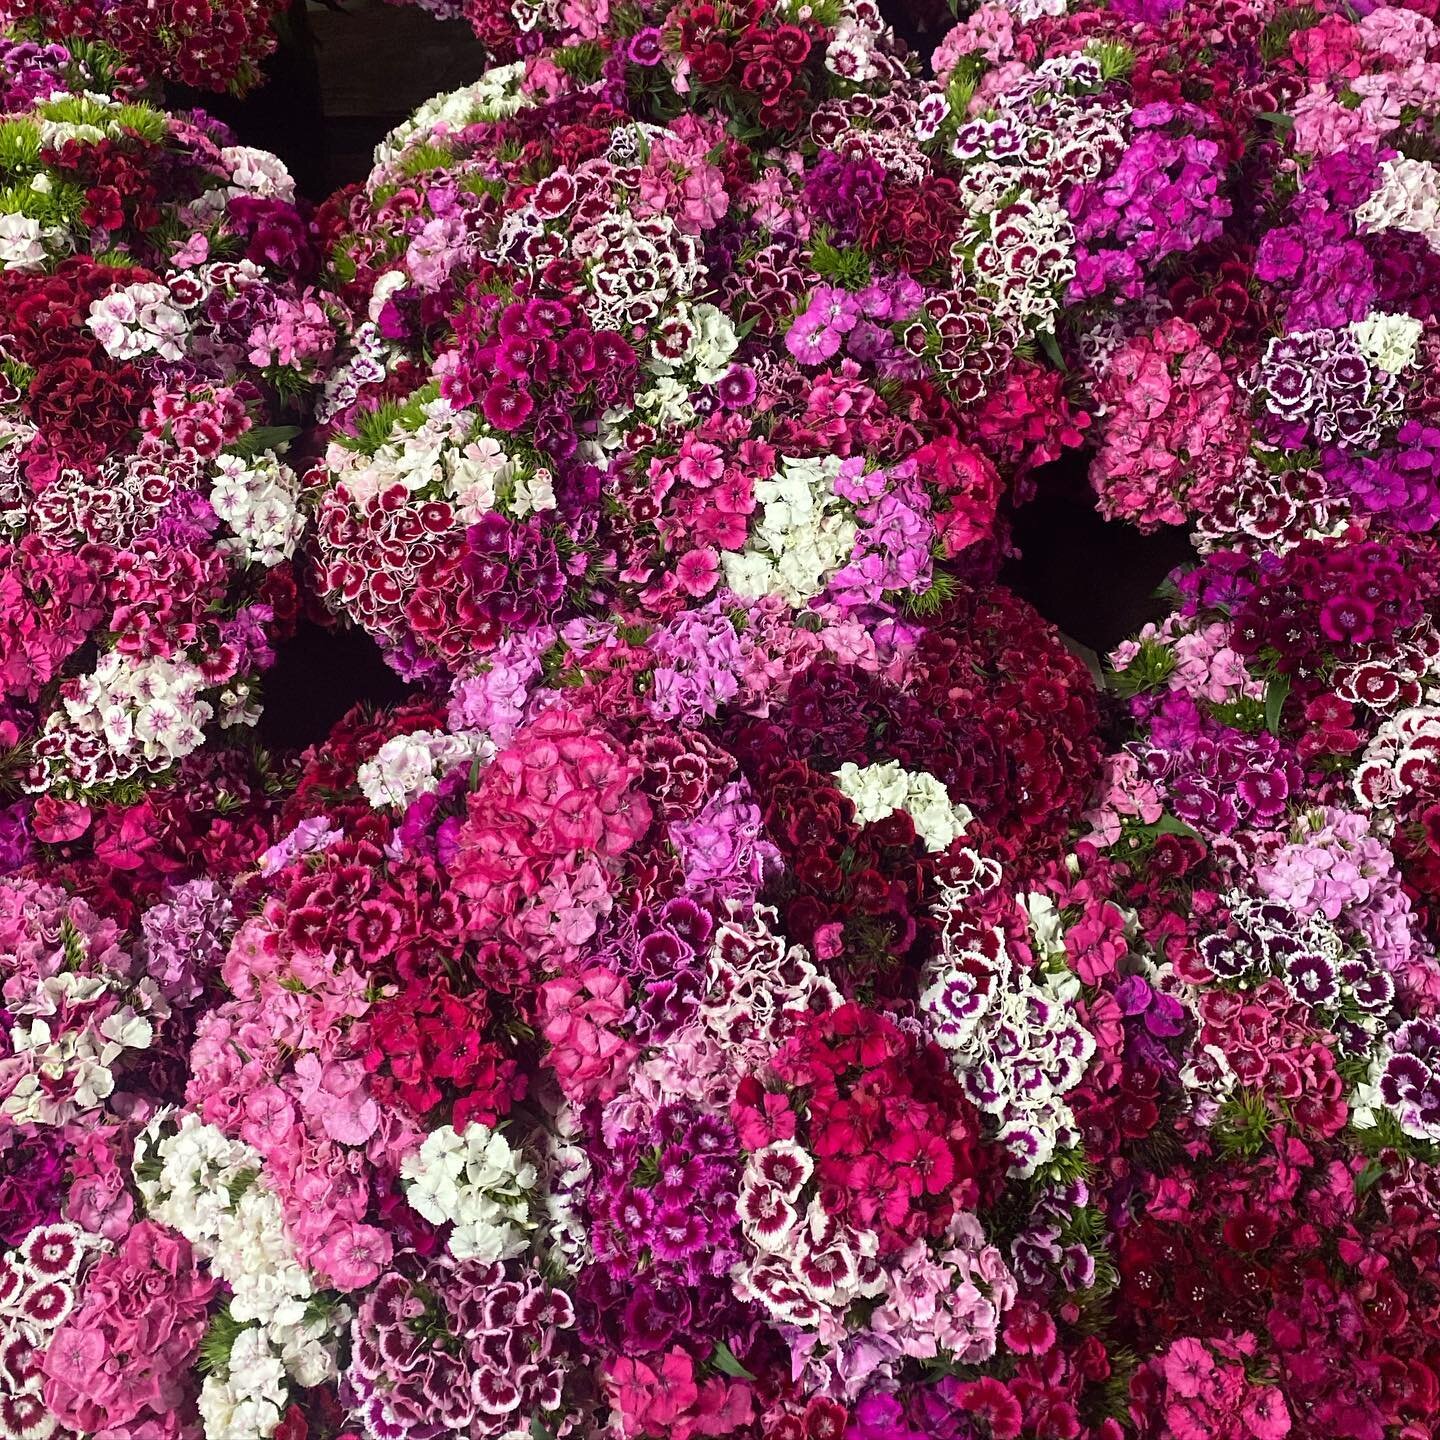 This week we are offering Fresh Cut Sweet William. 
Retail: @grownyc McCarron Park &amp; Tribecca 
Farm Pick Up available! Visit our website for more info! 
#njflowers #njflowerfarmer #freshcutflowers #sweetwilliam #njfarms #flowerstagram #sweetwilli